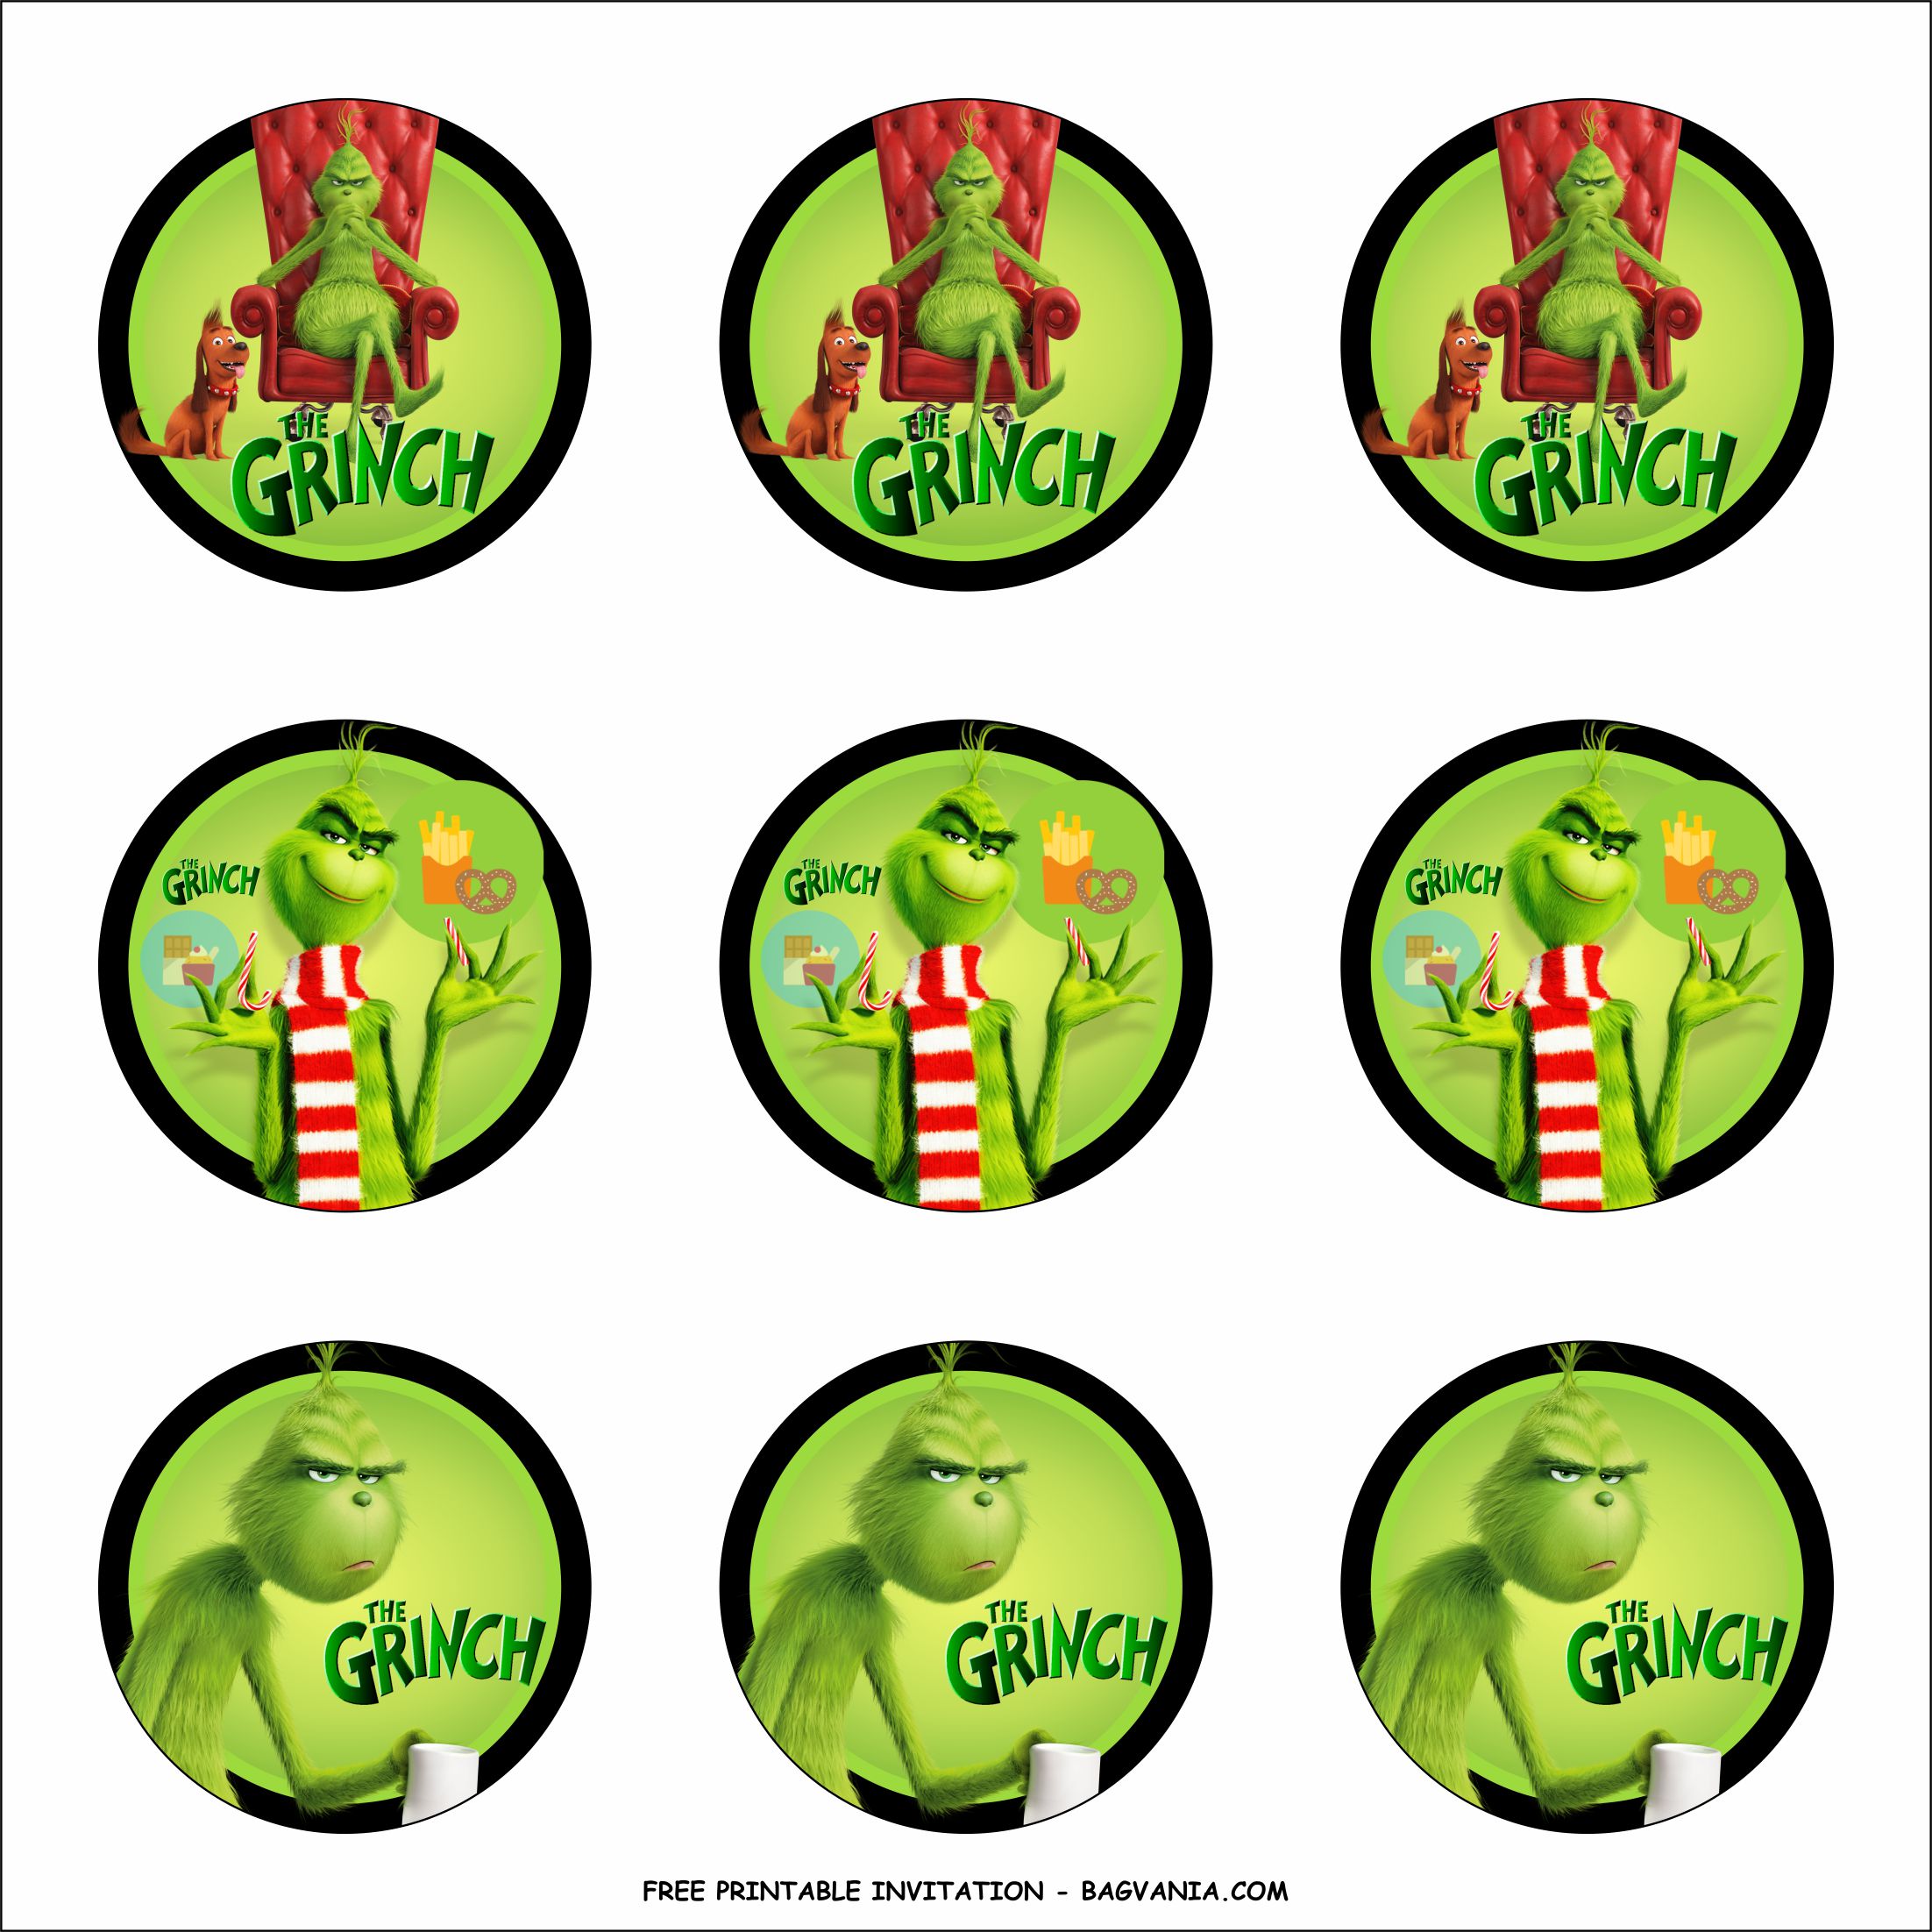 FREE PRINTABLE) - The Grinch Birthday Party Kits Template.